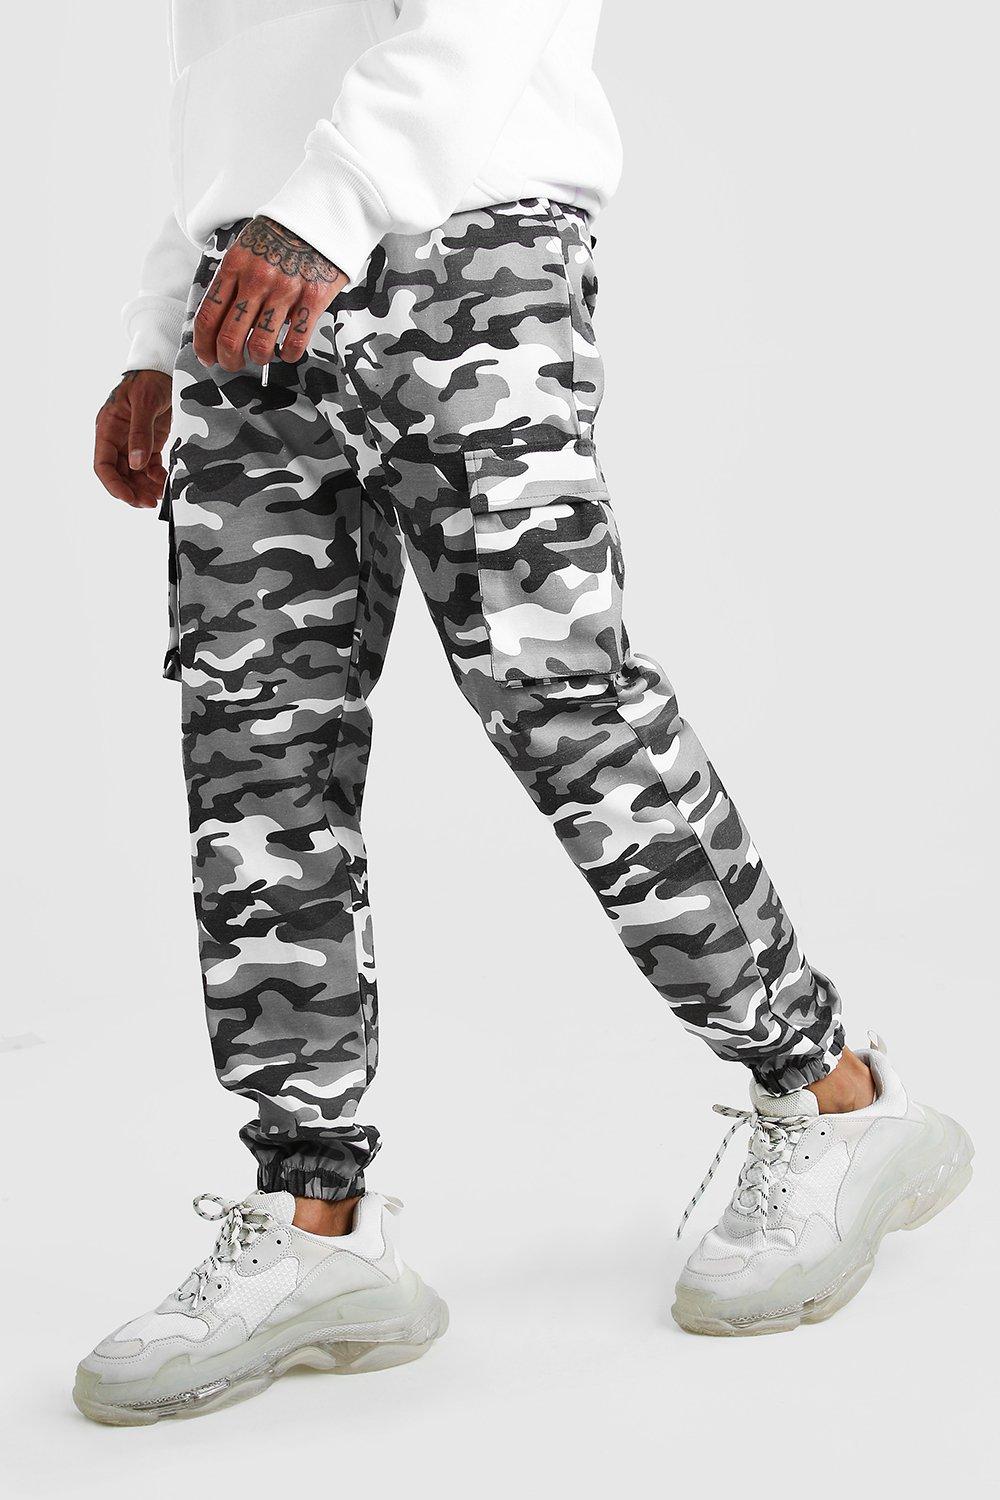 gray camouflage pants